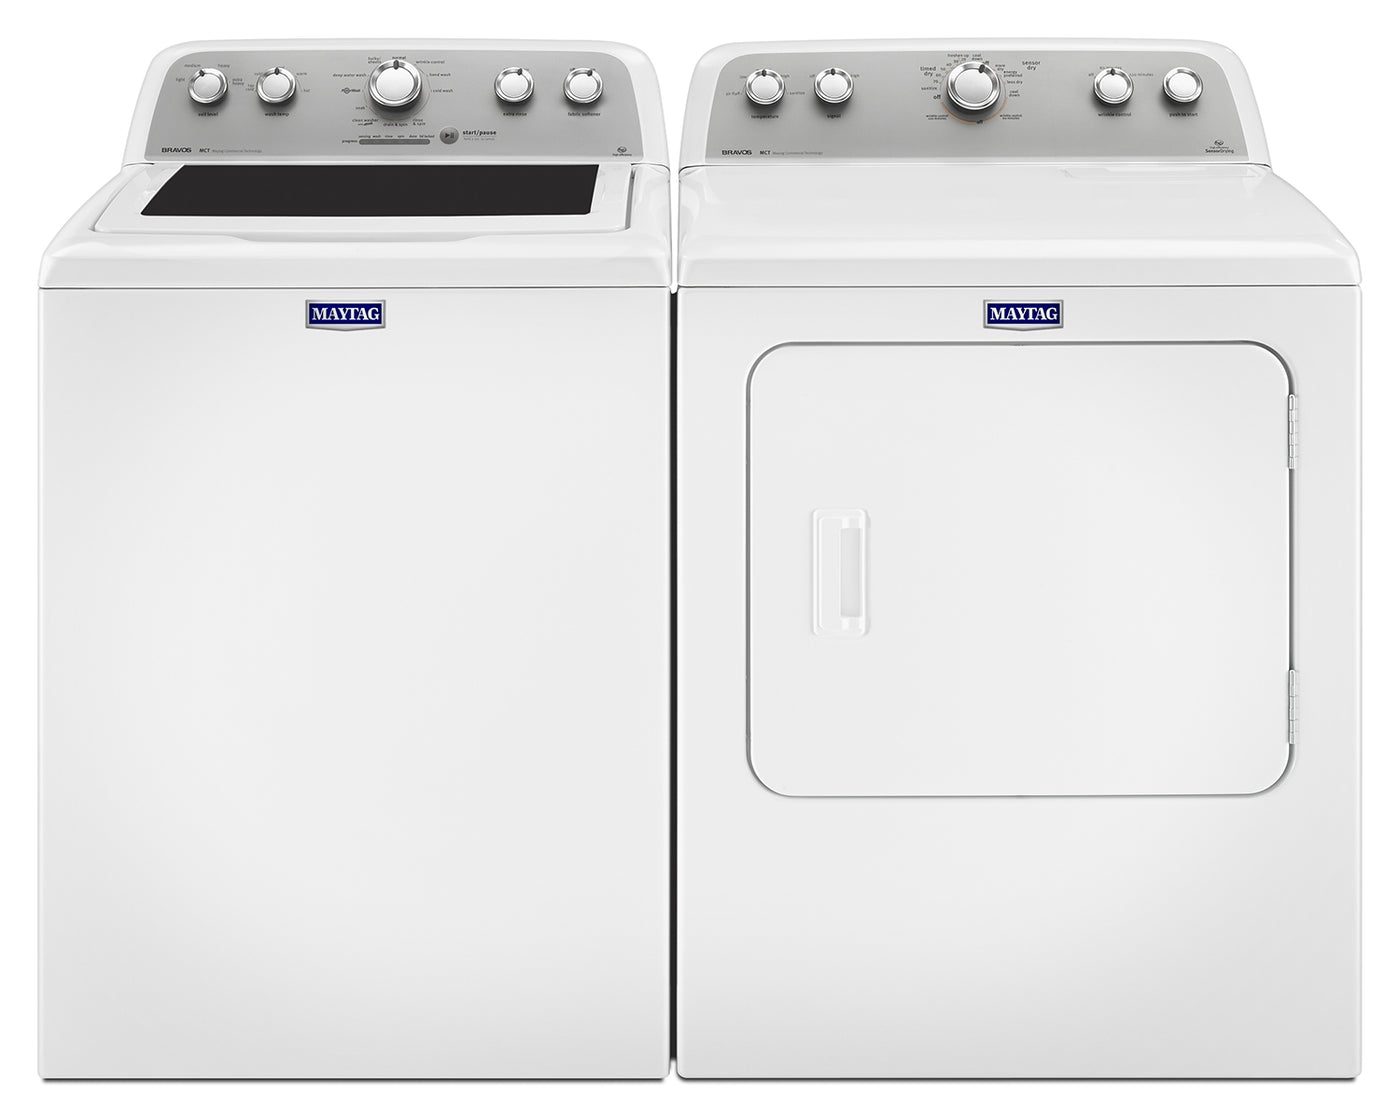 Maytag Bravos 5 0 Cu Ft Top Load Washer And 7 0 Cu Ft